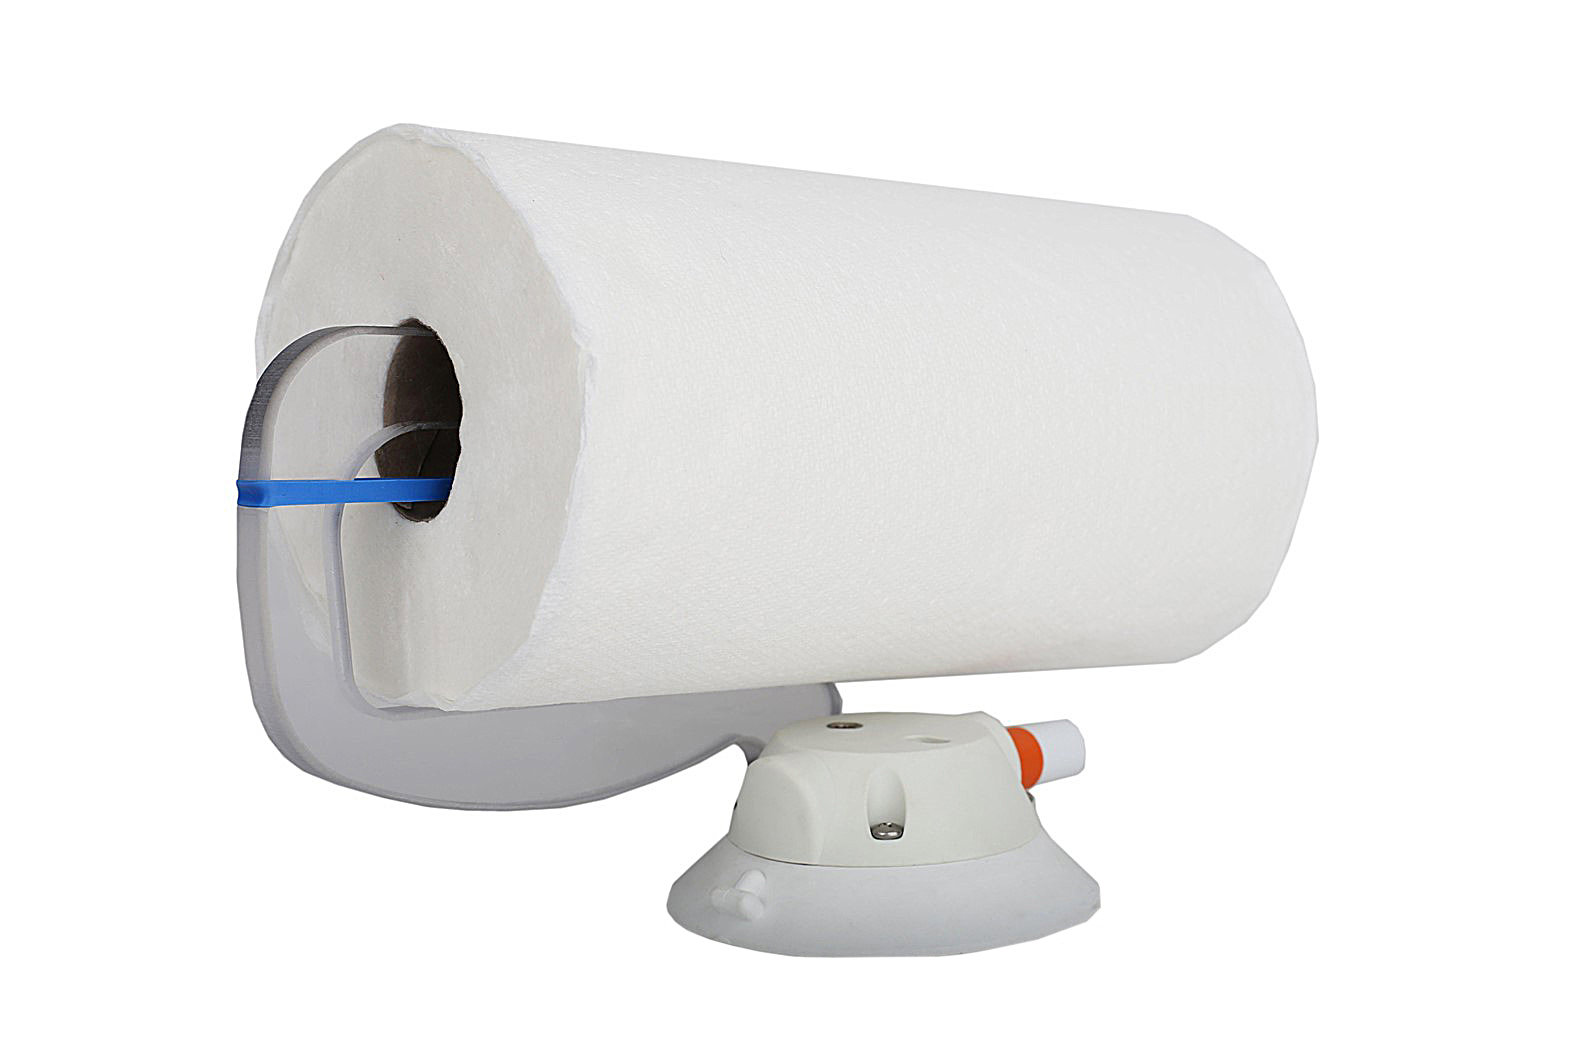 https://www.quadratec.com/sites/default/files/styles/product_zoomed/public/product_images/seasucker-mb5420-paper-towel-holder-tabletop-roll-main.jpg